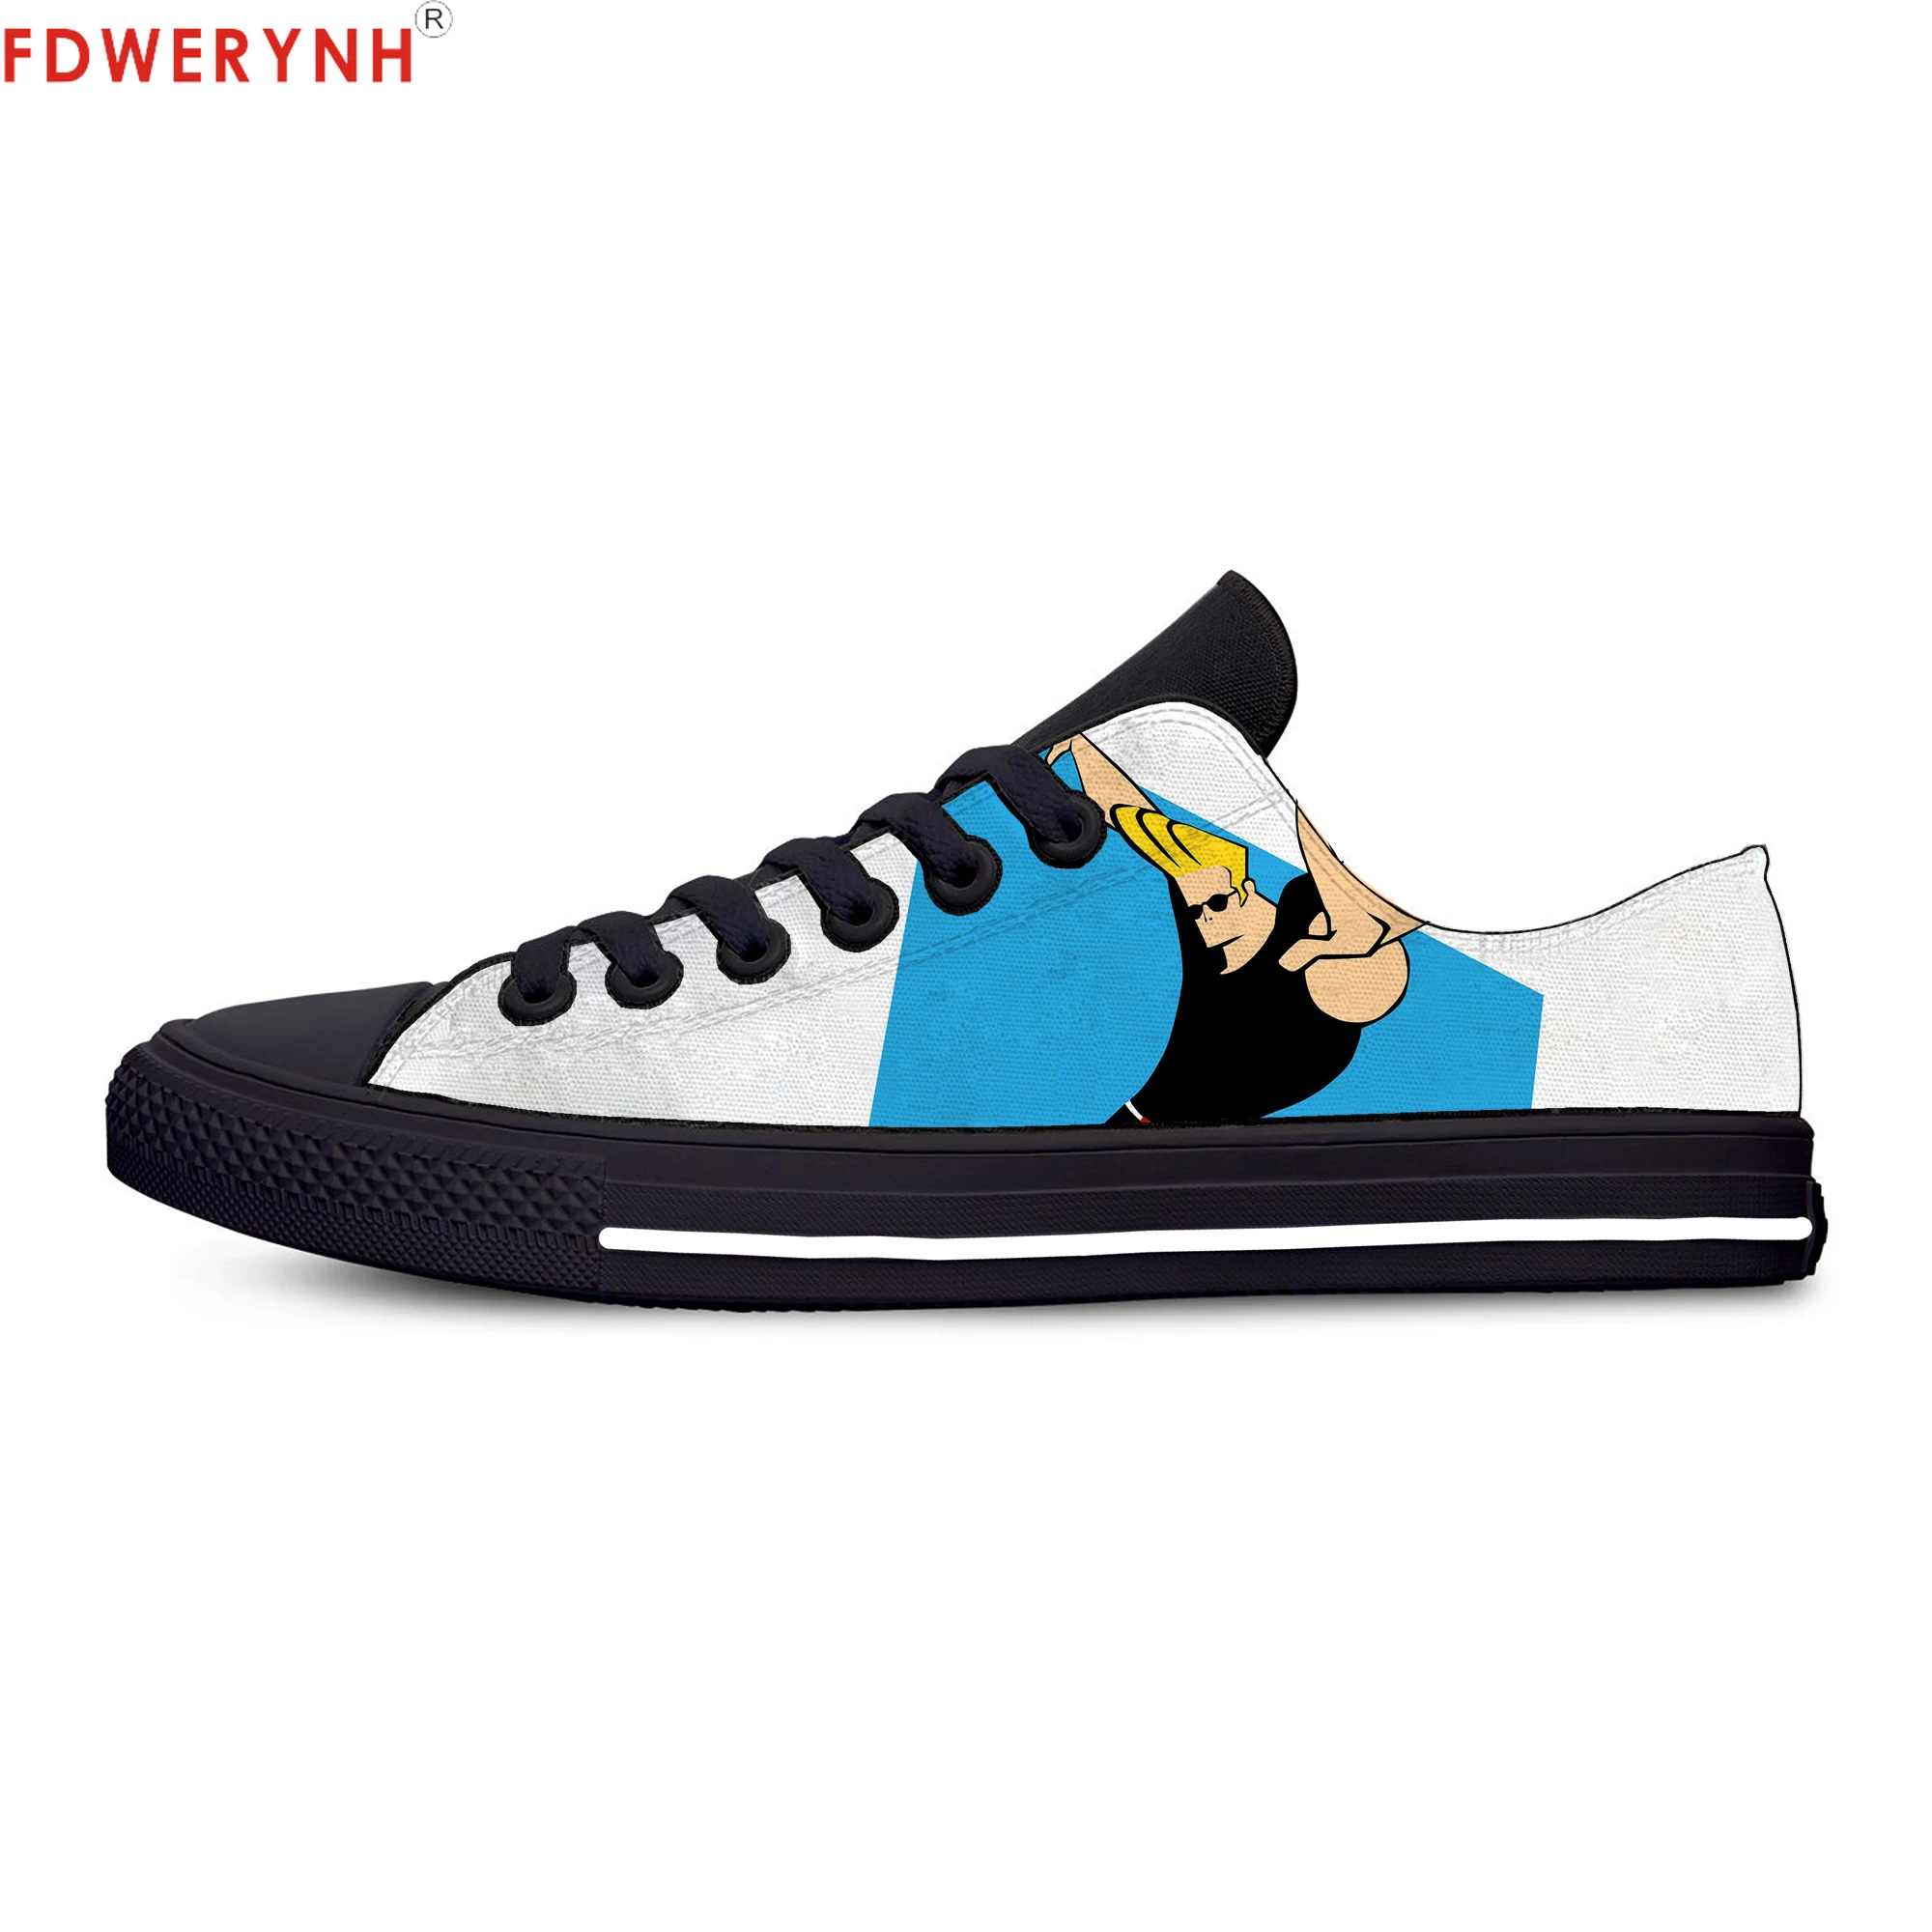 

Men's Casual Shoes Johnny Bravo Biceps Fitness Red MuscleNerd Body Building Top Cartoon Print Canvas Casual Shoes